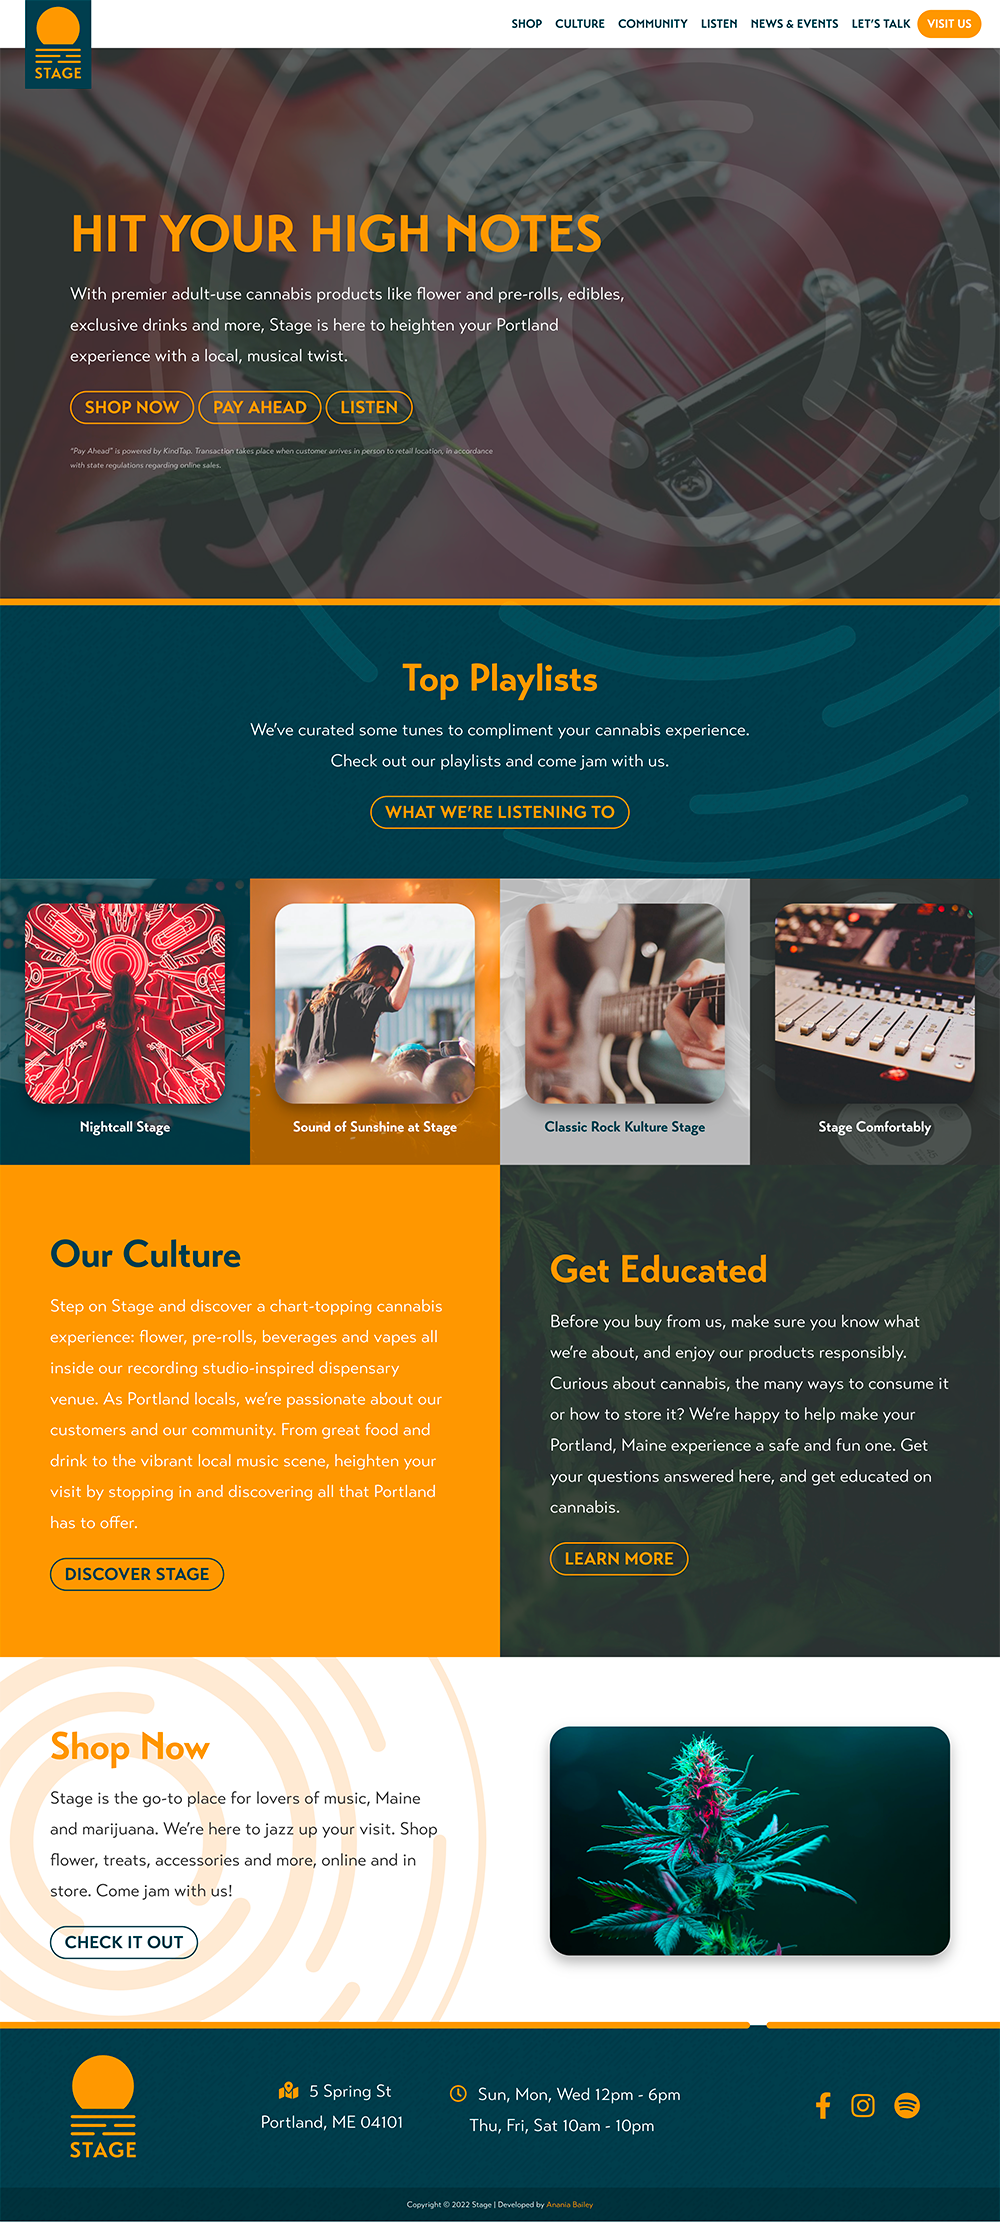 A screenshot of the stage cannabis website.